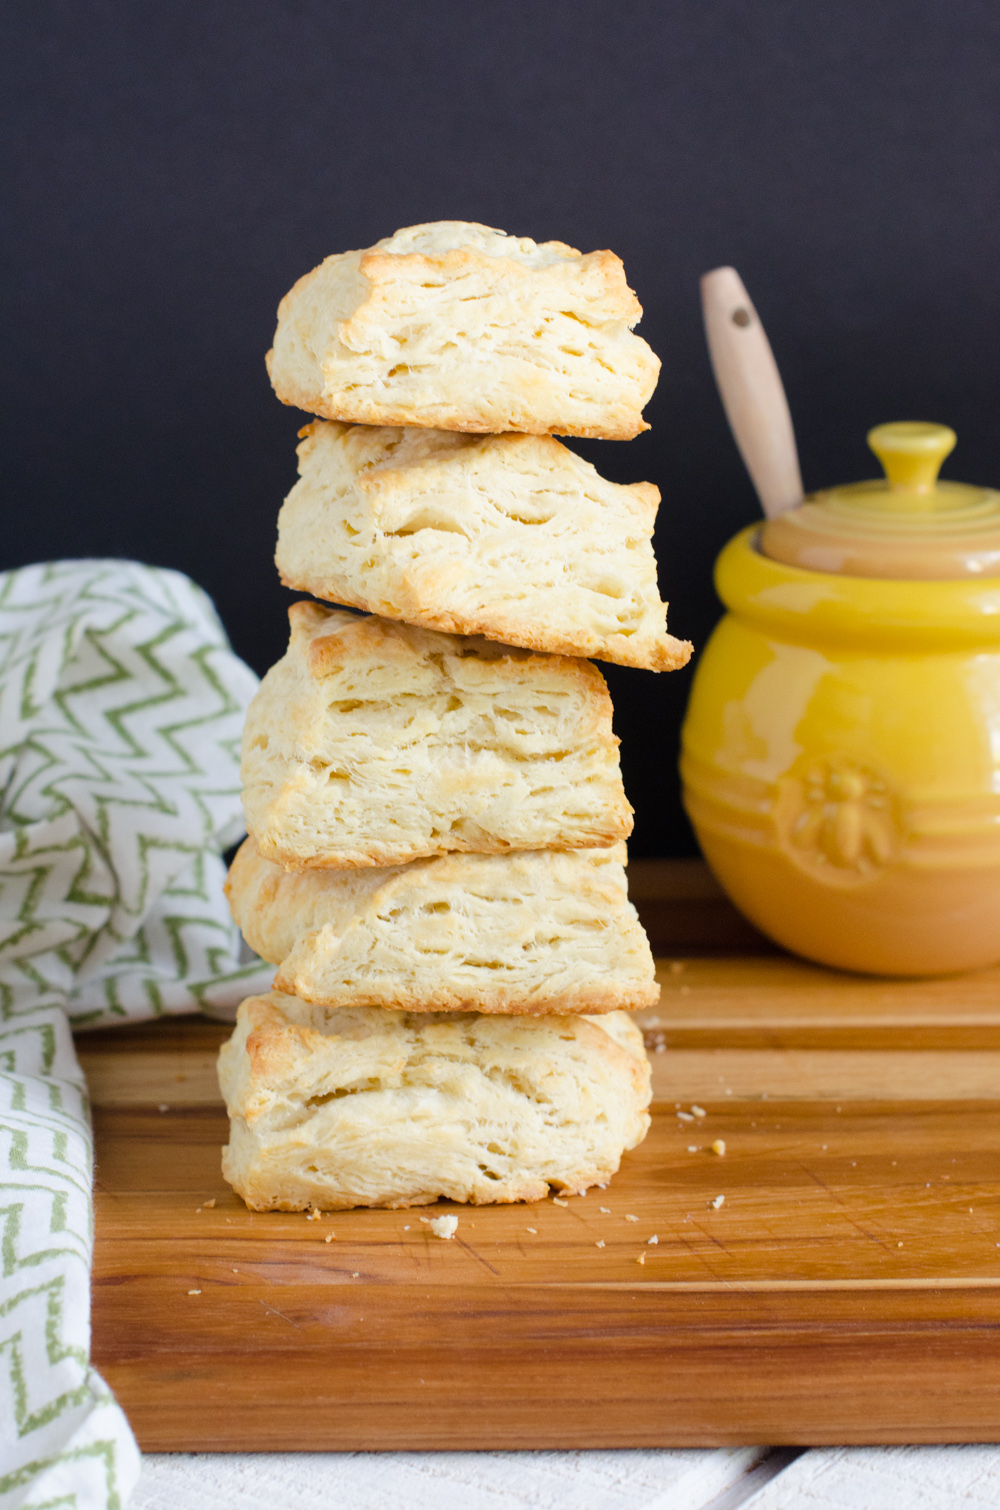 Flaky Butter Biscuits recipe from ChefSarahElizabeth.com